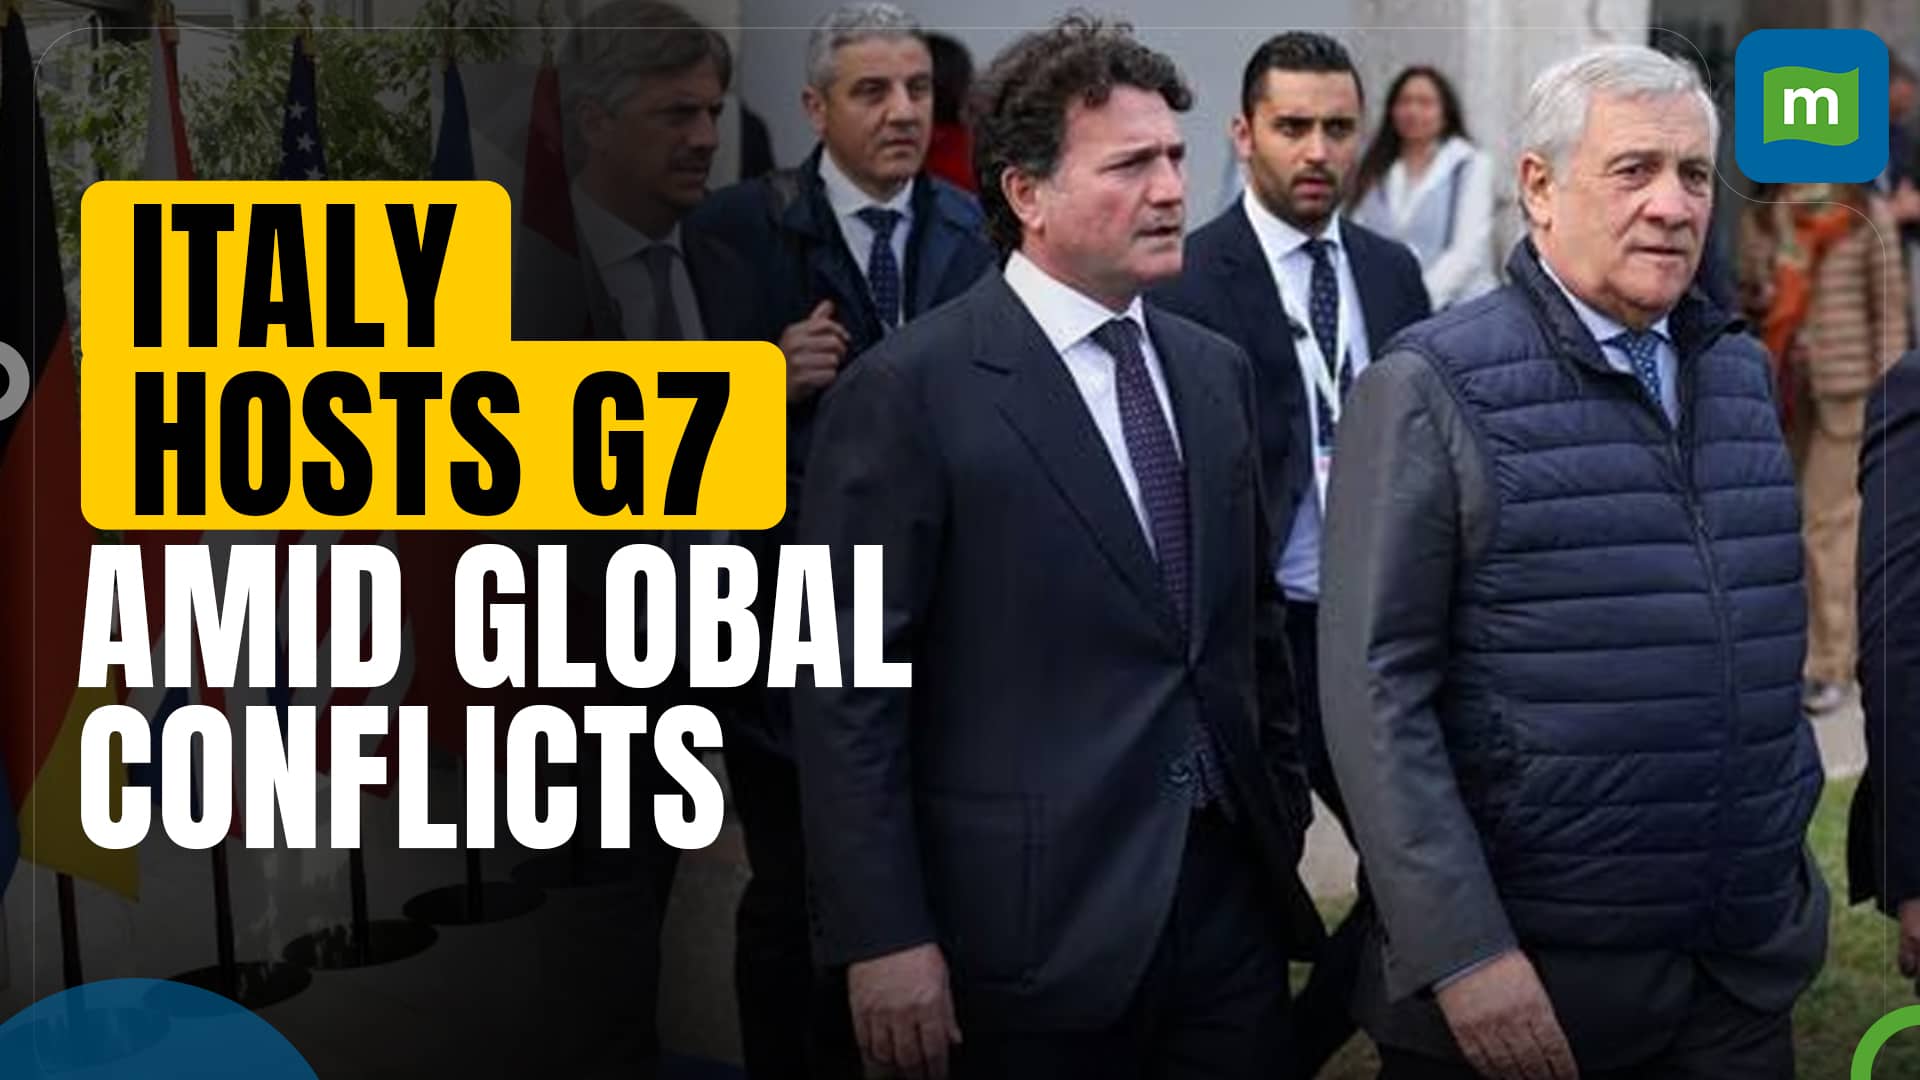 Italy Hosts G7 Foreign Ministers Amid Global Conflict Concerns | Targets Sanctions on Iran